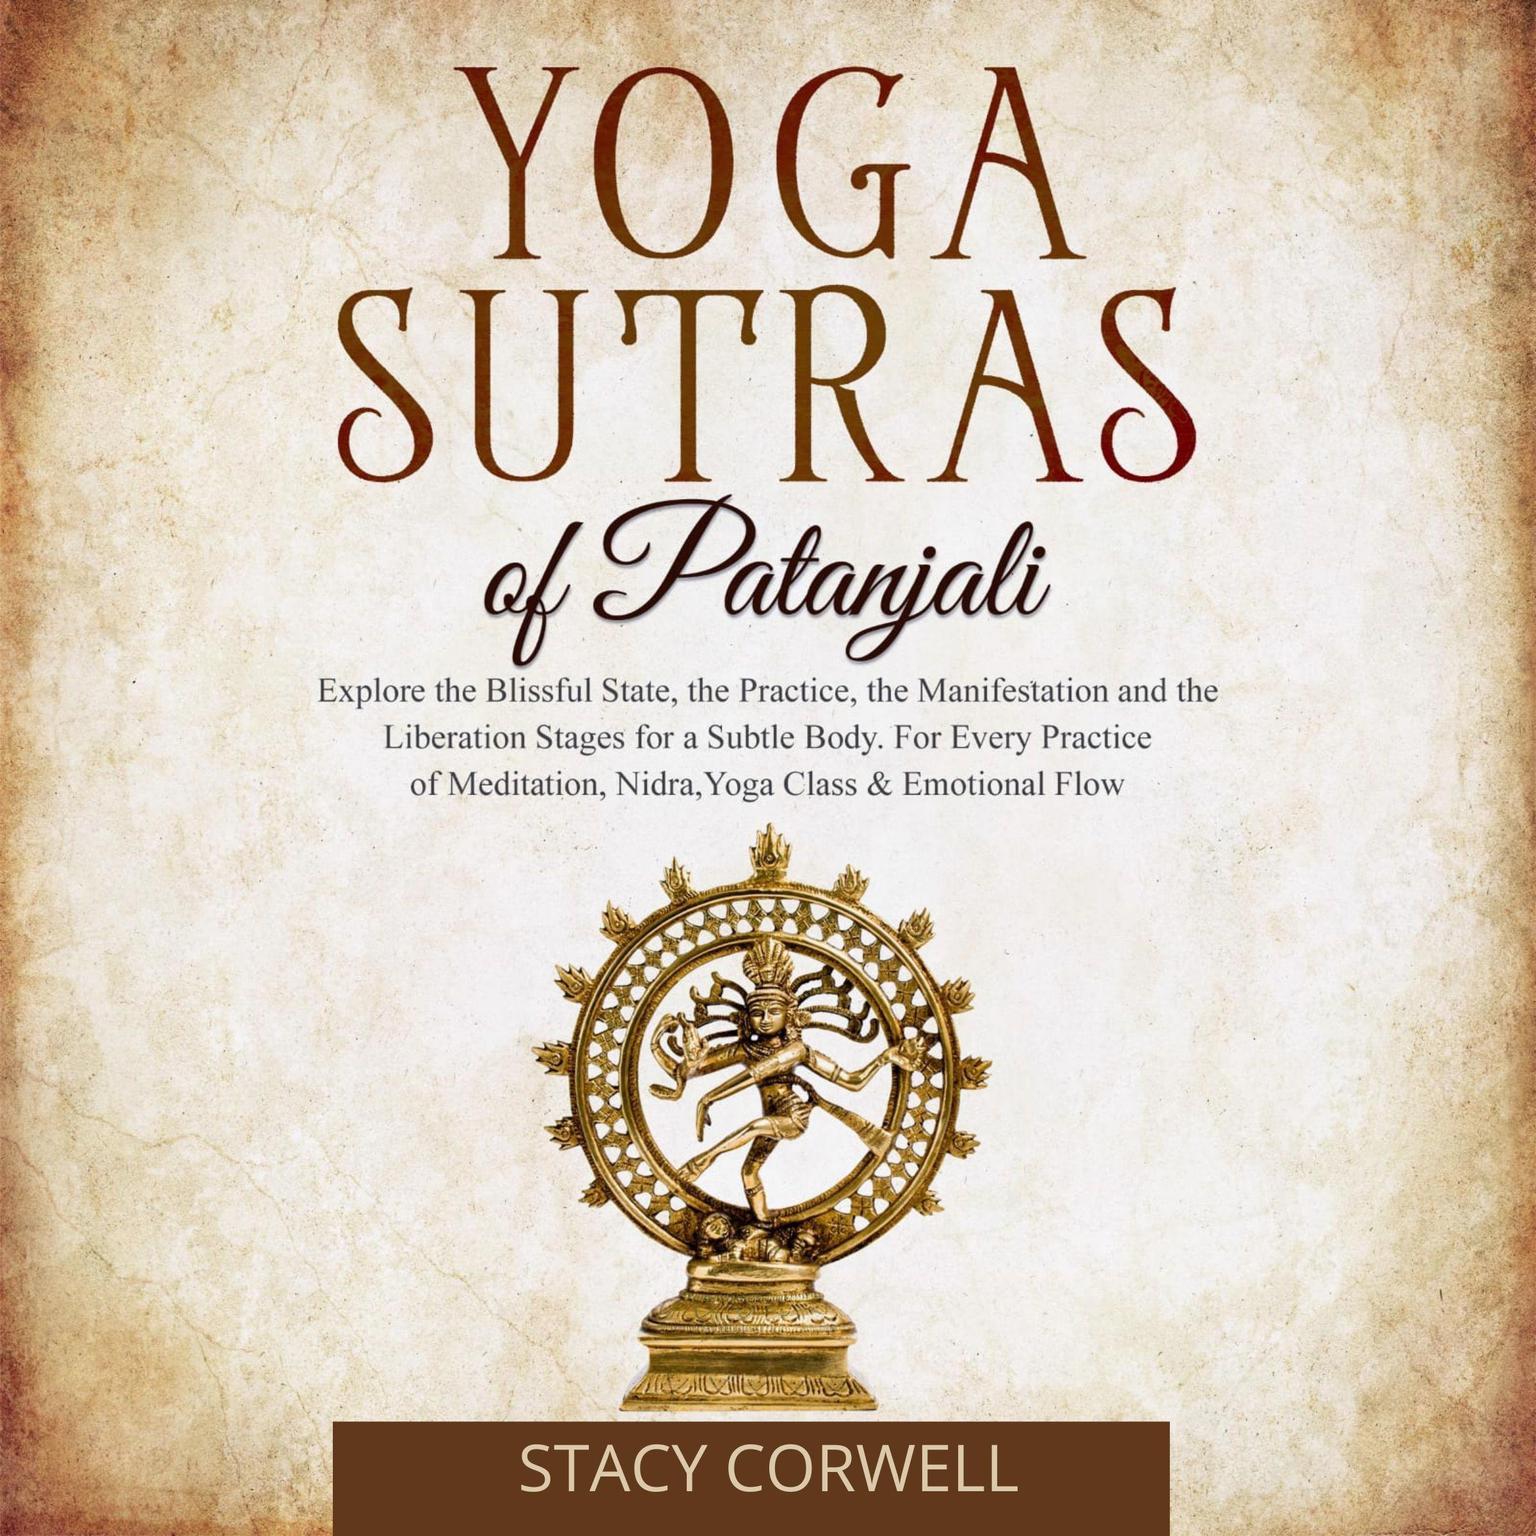 Yoga Sutras of Patanjali: Explore the Blissful State, the Practice, the Manisfestation and the Liberation Stages for a Subtle Body. For Every Practice of Meditation, Nidra, Yoga Class & Emotional Flow Audiobook, by Stacy Corwell